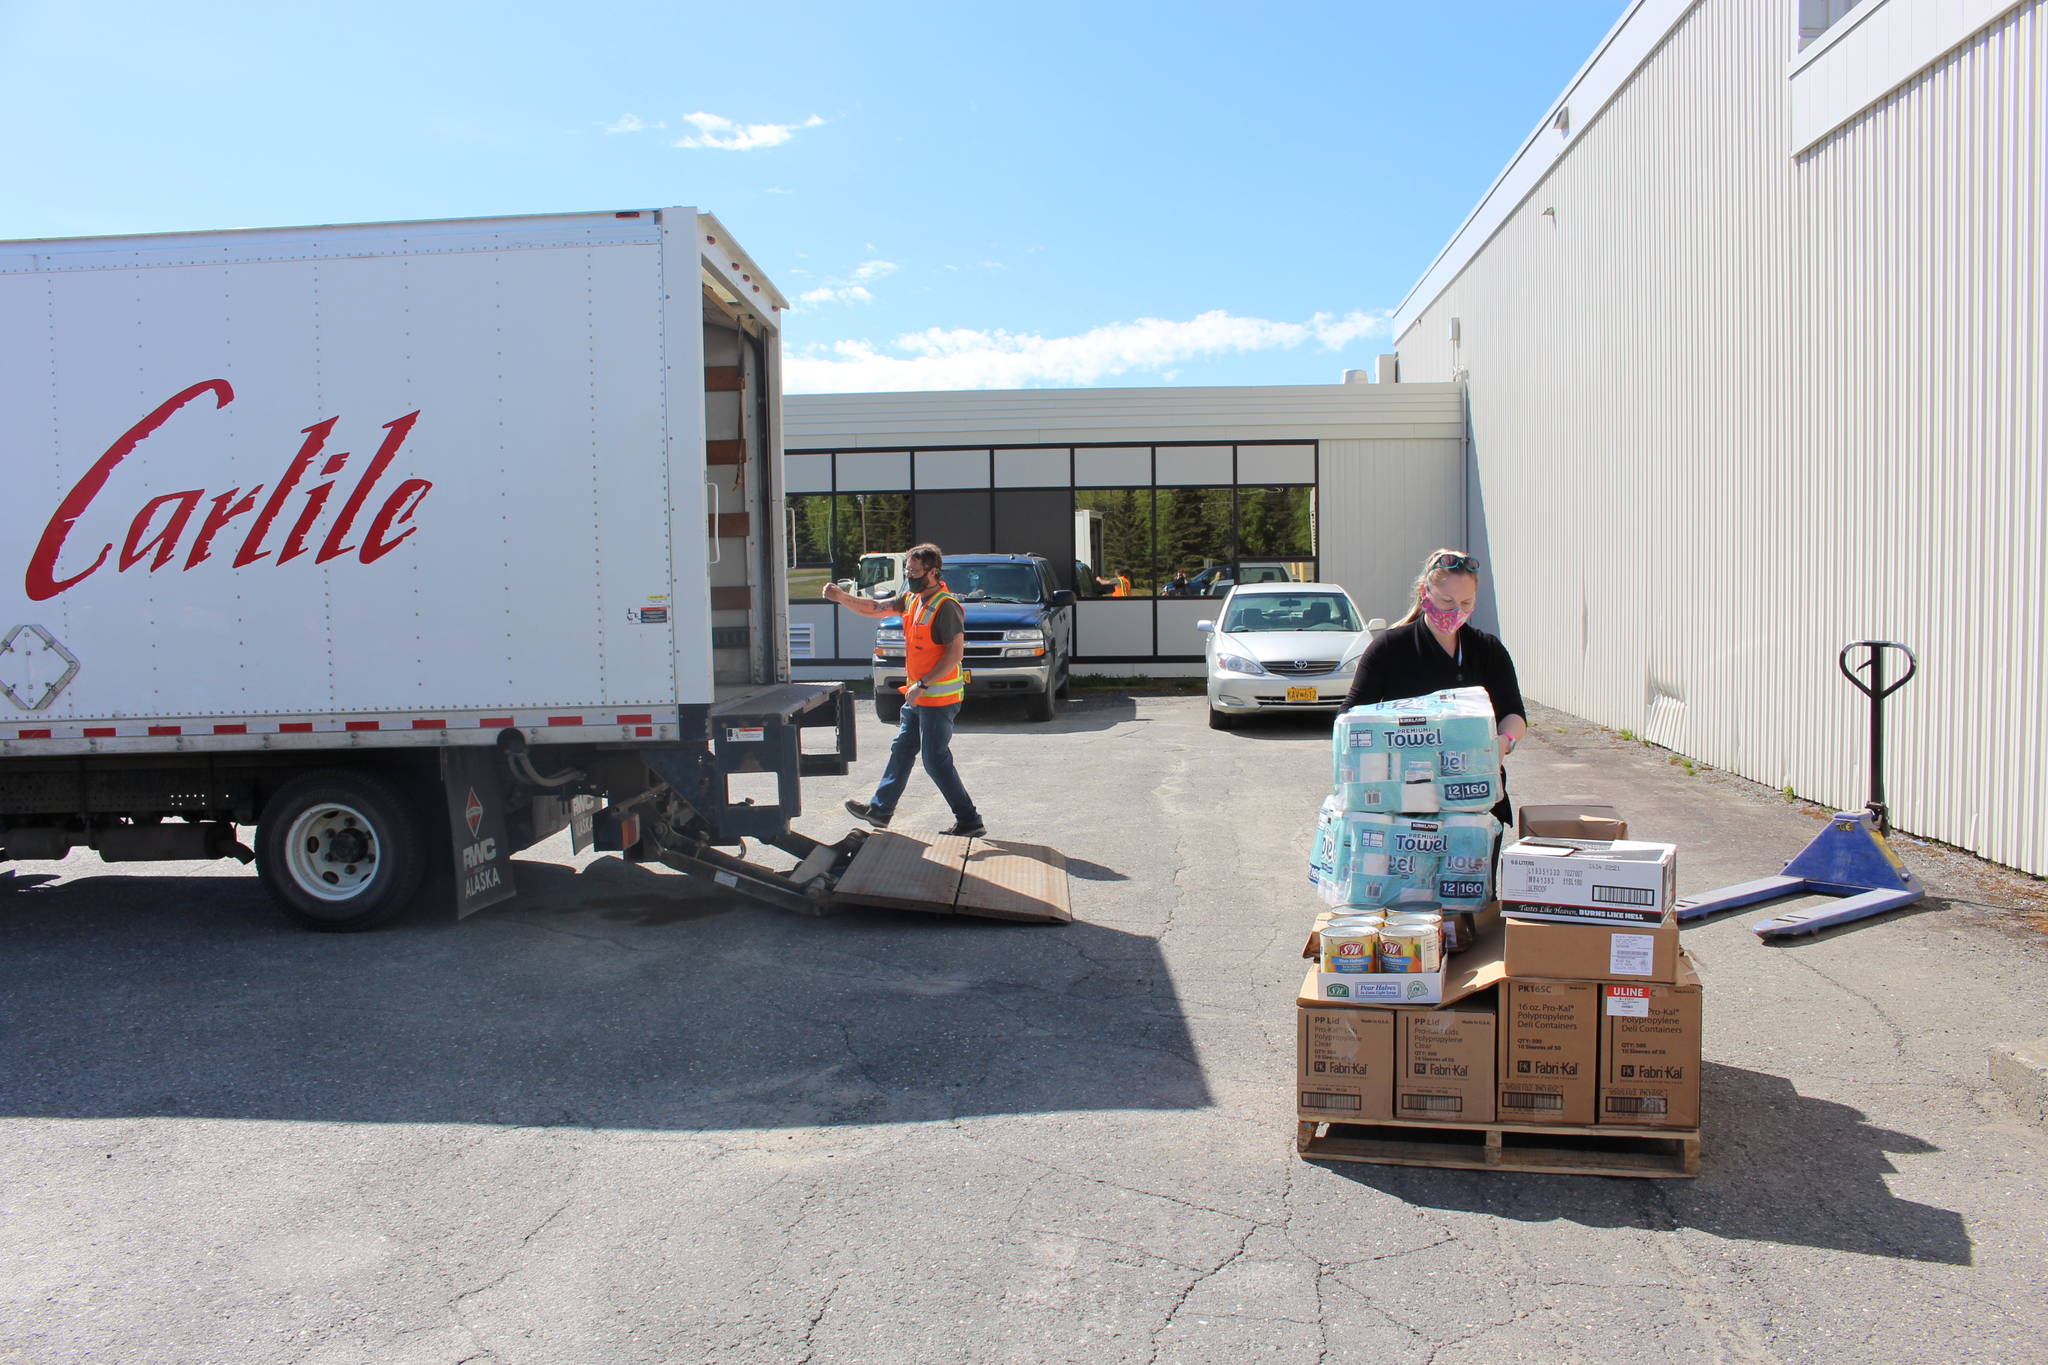 Kenai Peninsula Boys & Girls Clubs CEO Rachel Chaffee, right loads up a pallet with goods that Carlile driver Robert Ivy will take back to Carlile’s Kenai headquarters, where it will then be transported to Anchorage and ultimately Seward, at Kenai Central High School in Kenai, Alaska on May 28, 2020. (Photo by Brian Mazurek/Peninsula Clarion)